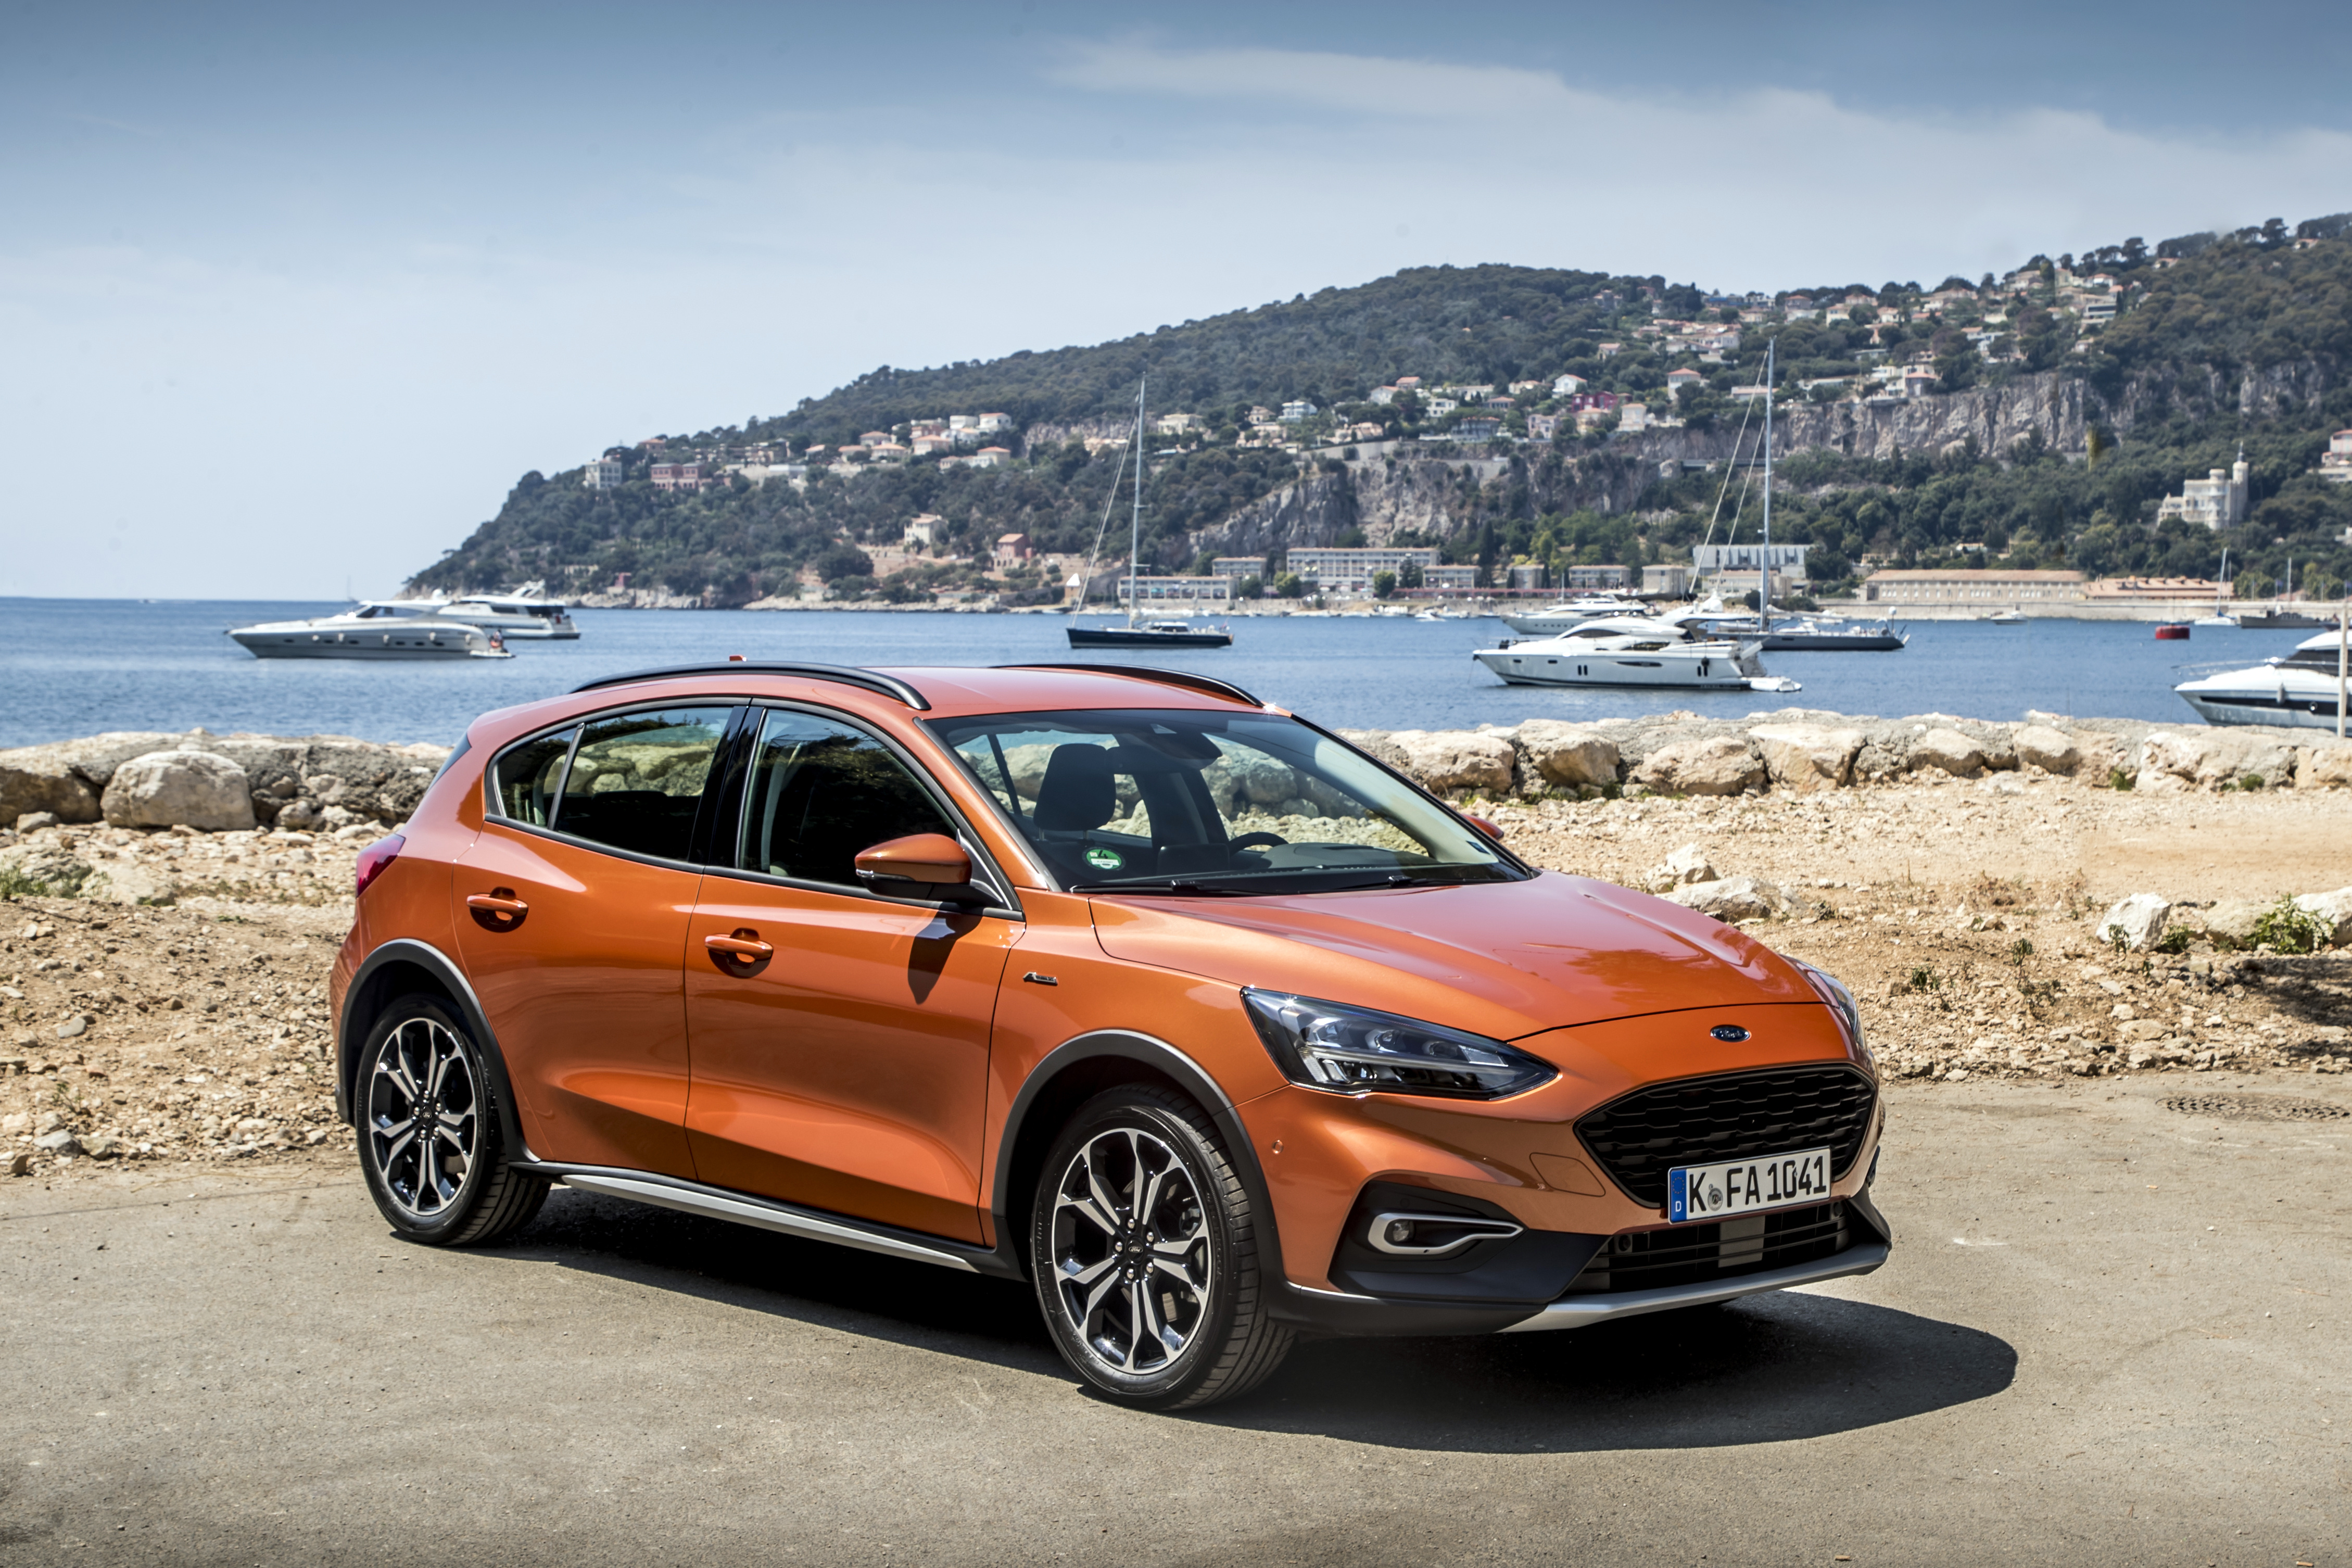 The Ford Focus Active – the car for the ‘life-lovers’